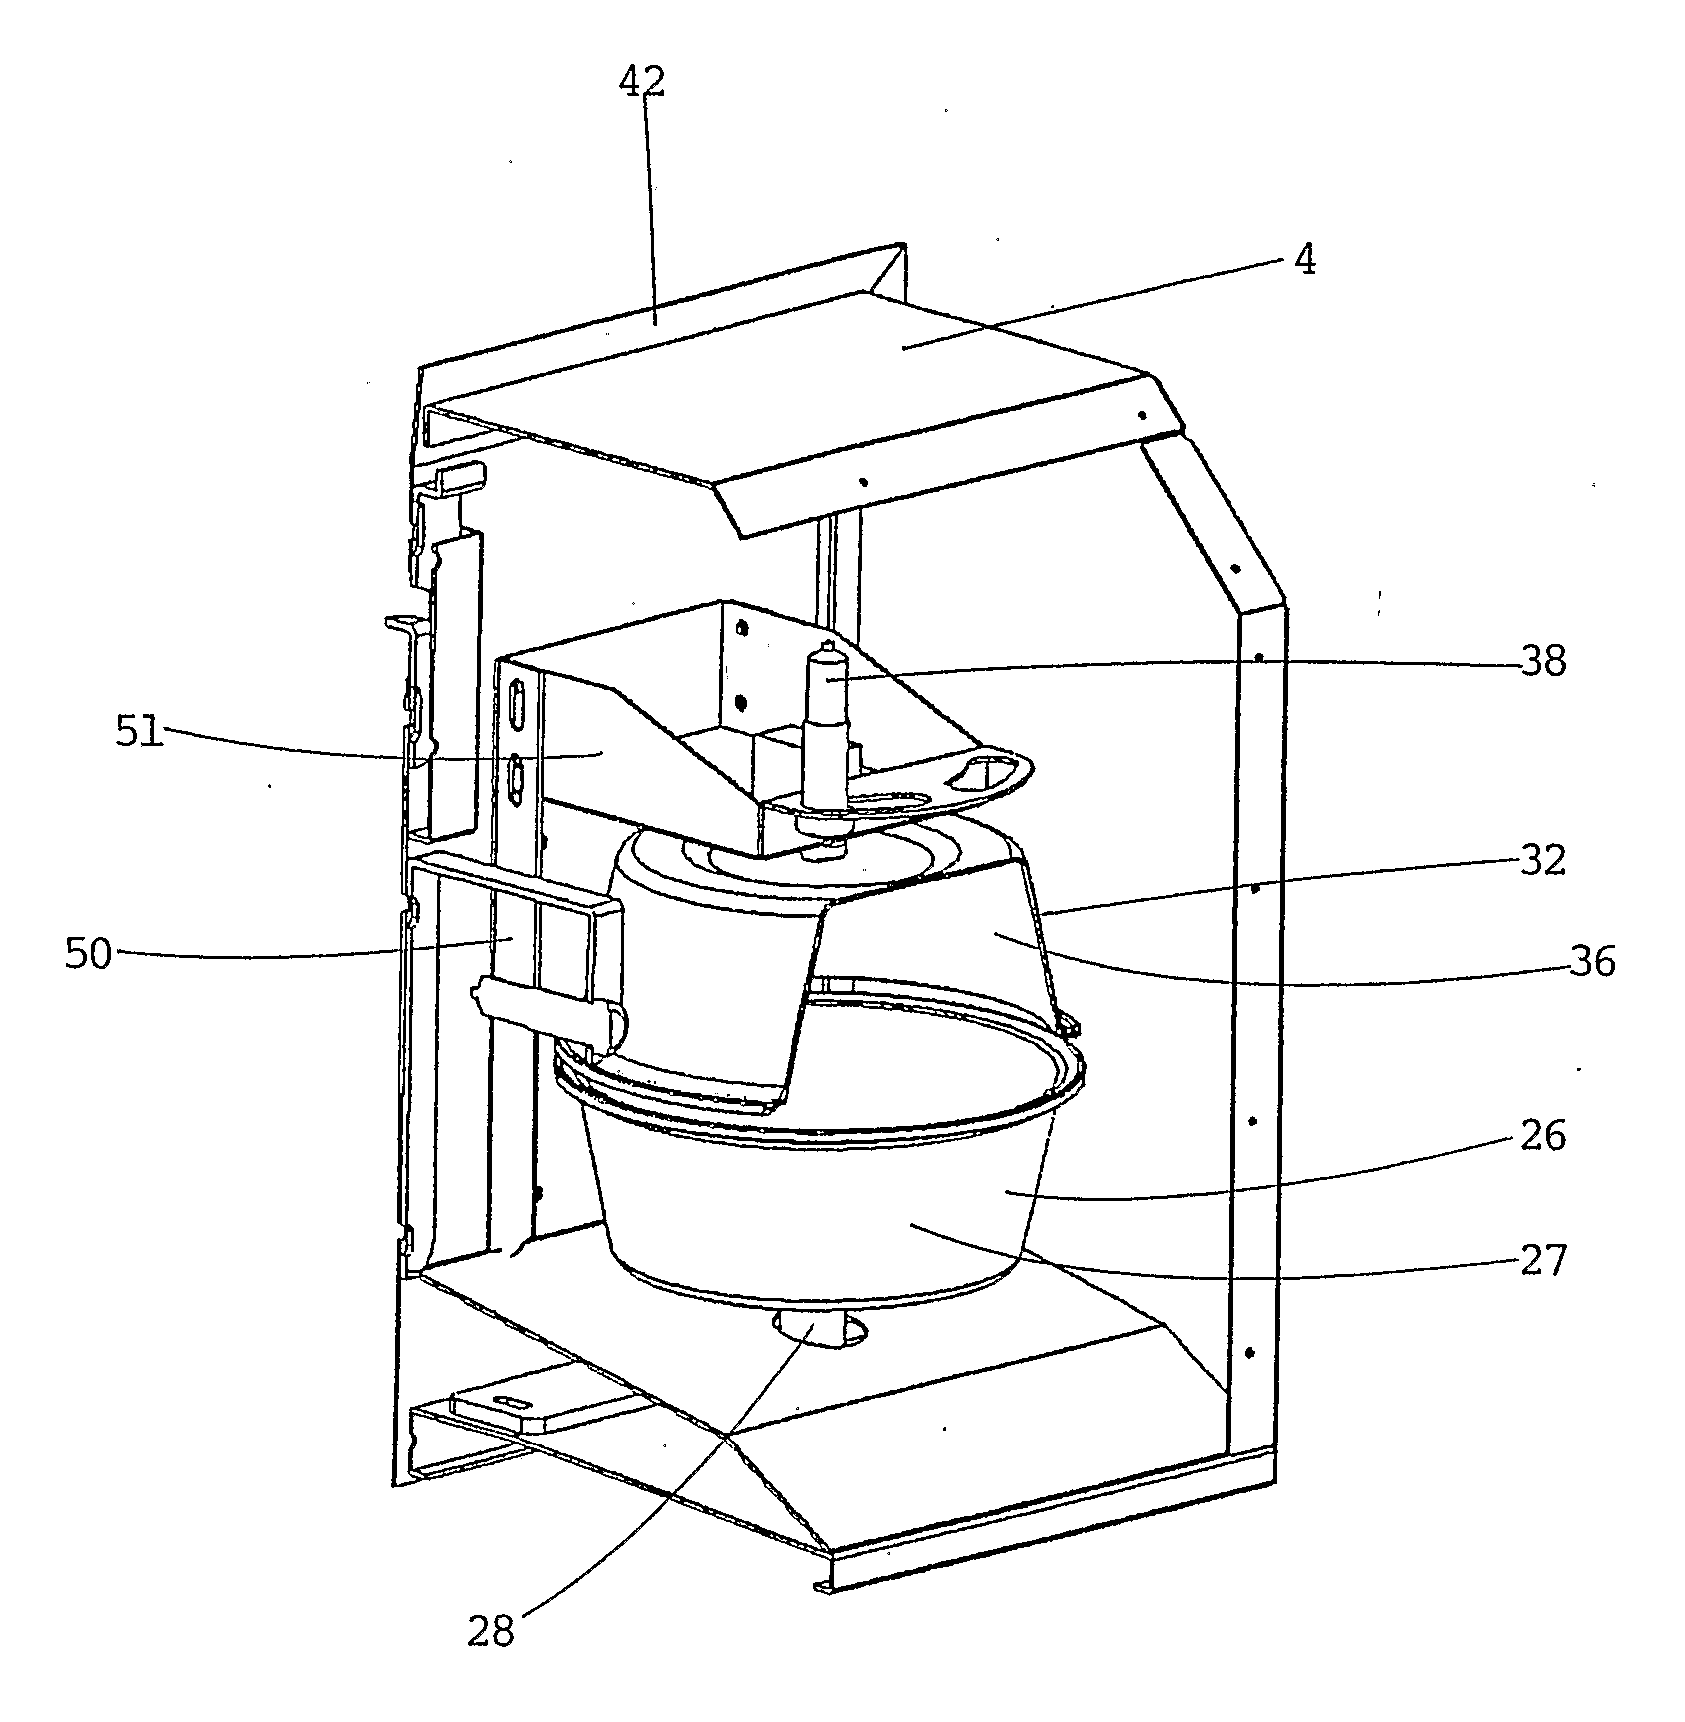 Method and system for automatically feeding animals